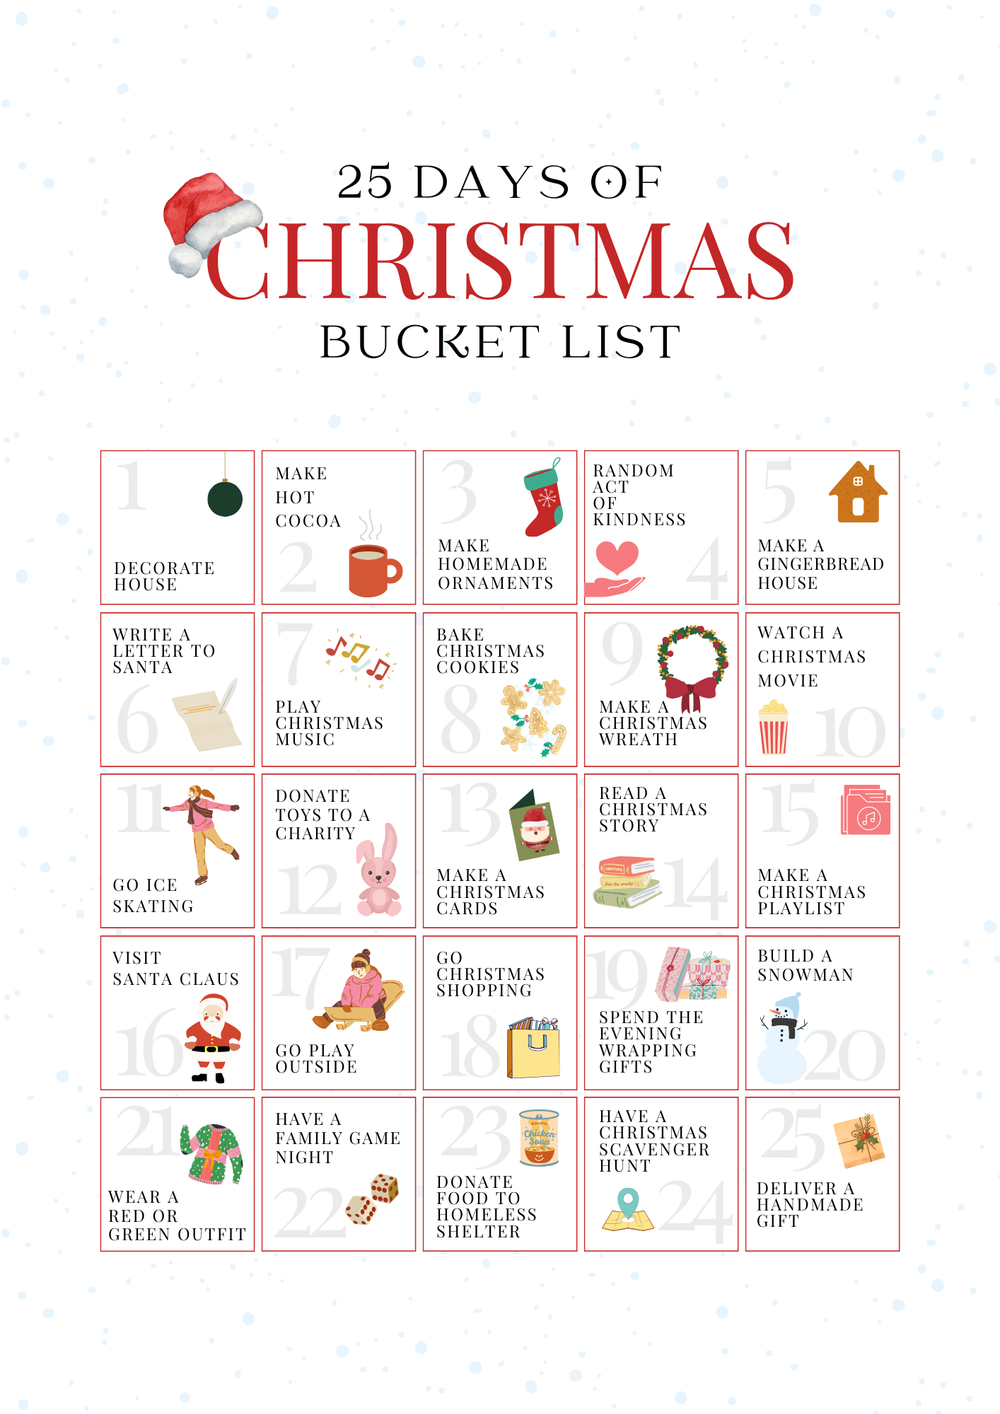 Printable Travel Games - The Bucket List Project